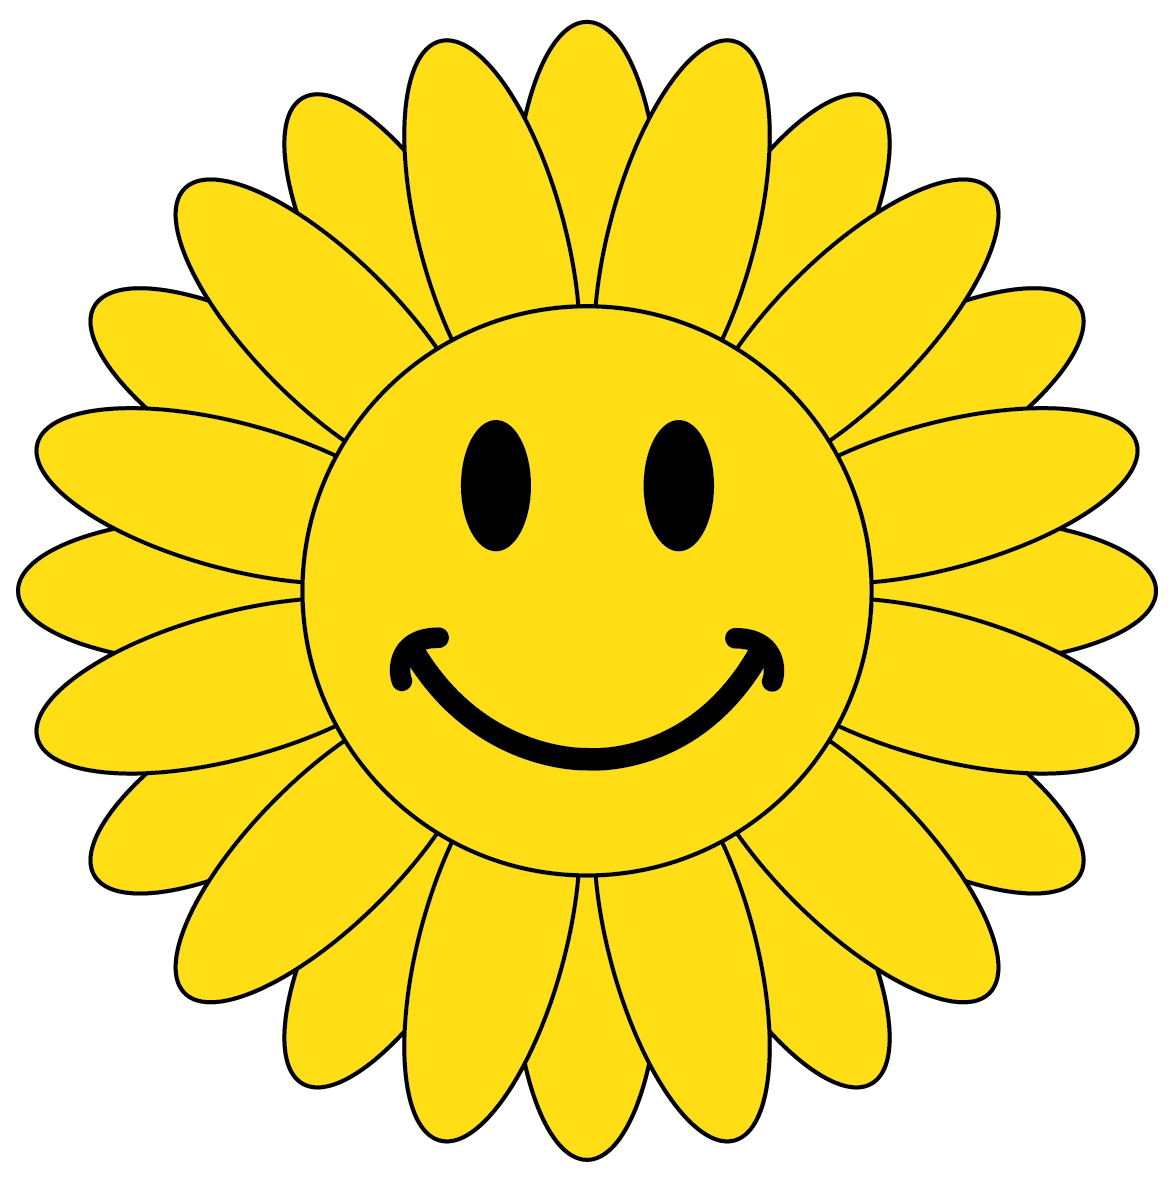 Clip Arts Related To : flower smiley face clipart. view all Smiley Flow...